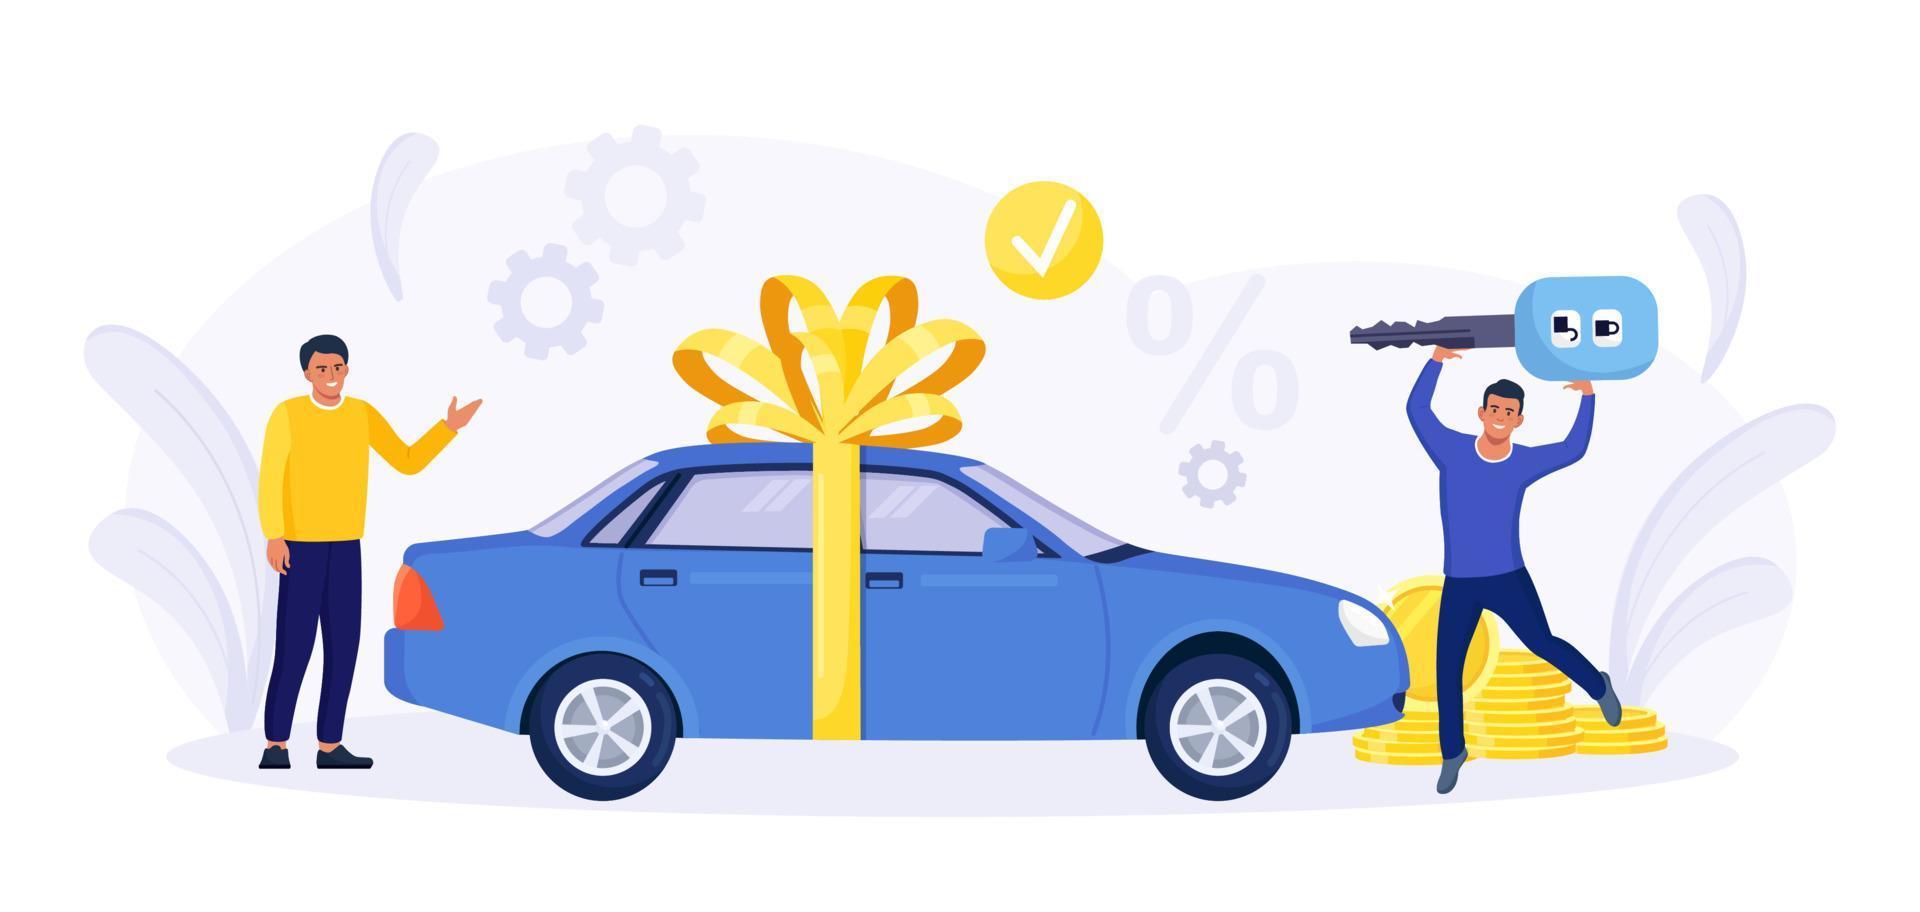 Happy People Celebrating Buying Auto. Automobile Purchase. Men Standing near New Sedan Car Wrapped with Big Festive Bow. Cars Rent, Sharing, Leasing. Successful Deal. Car Key in Hand vector